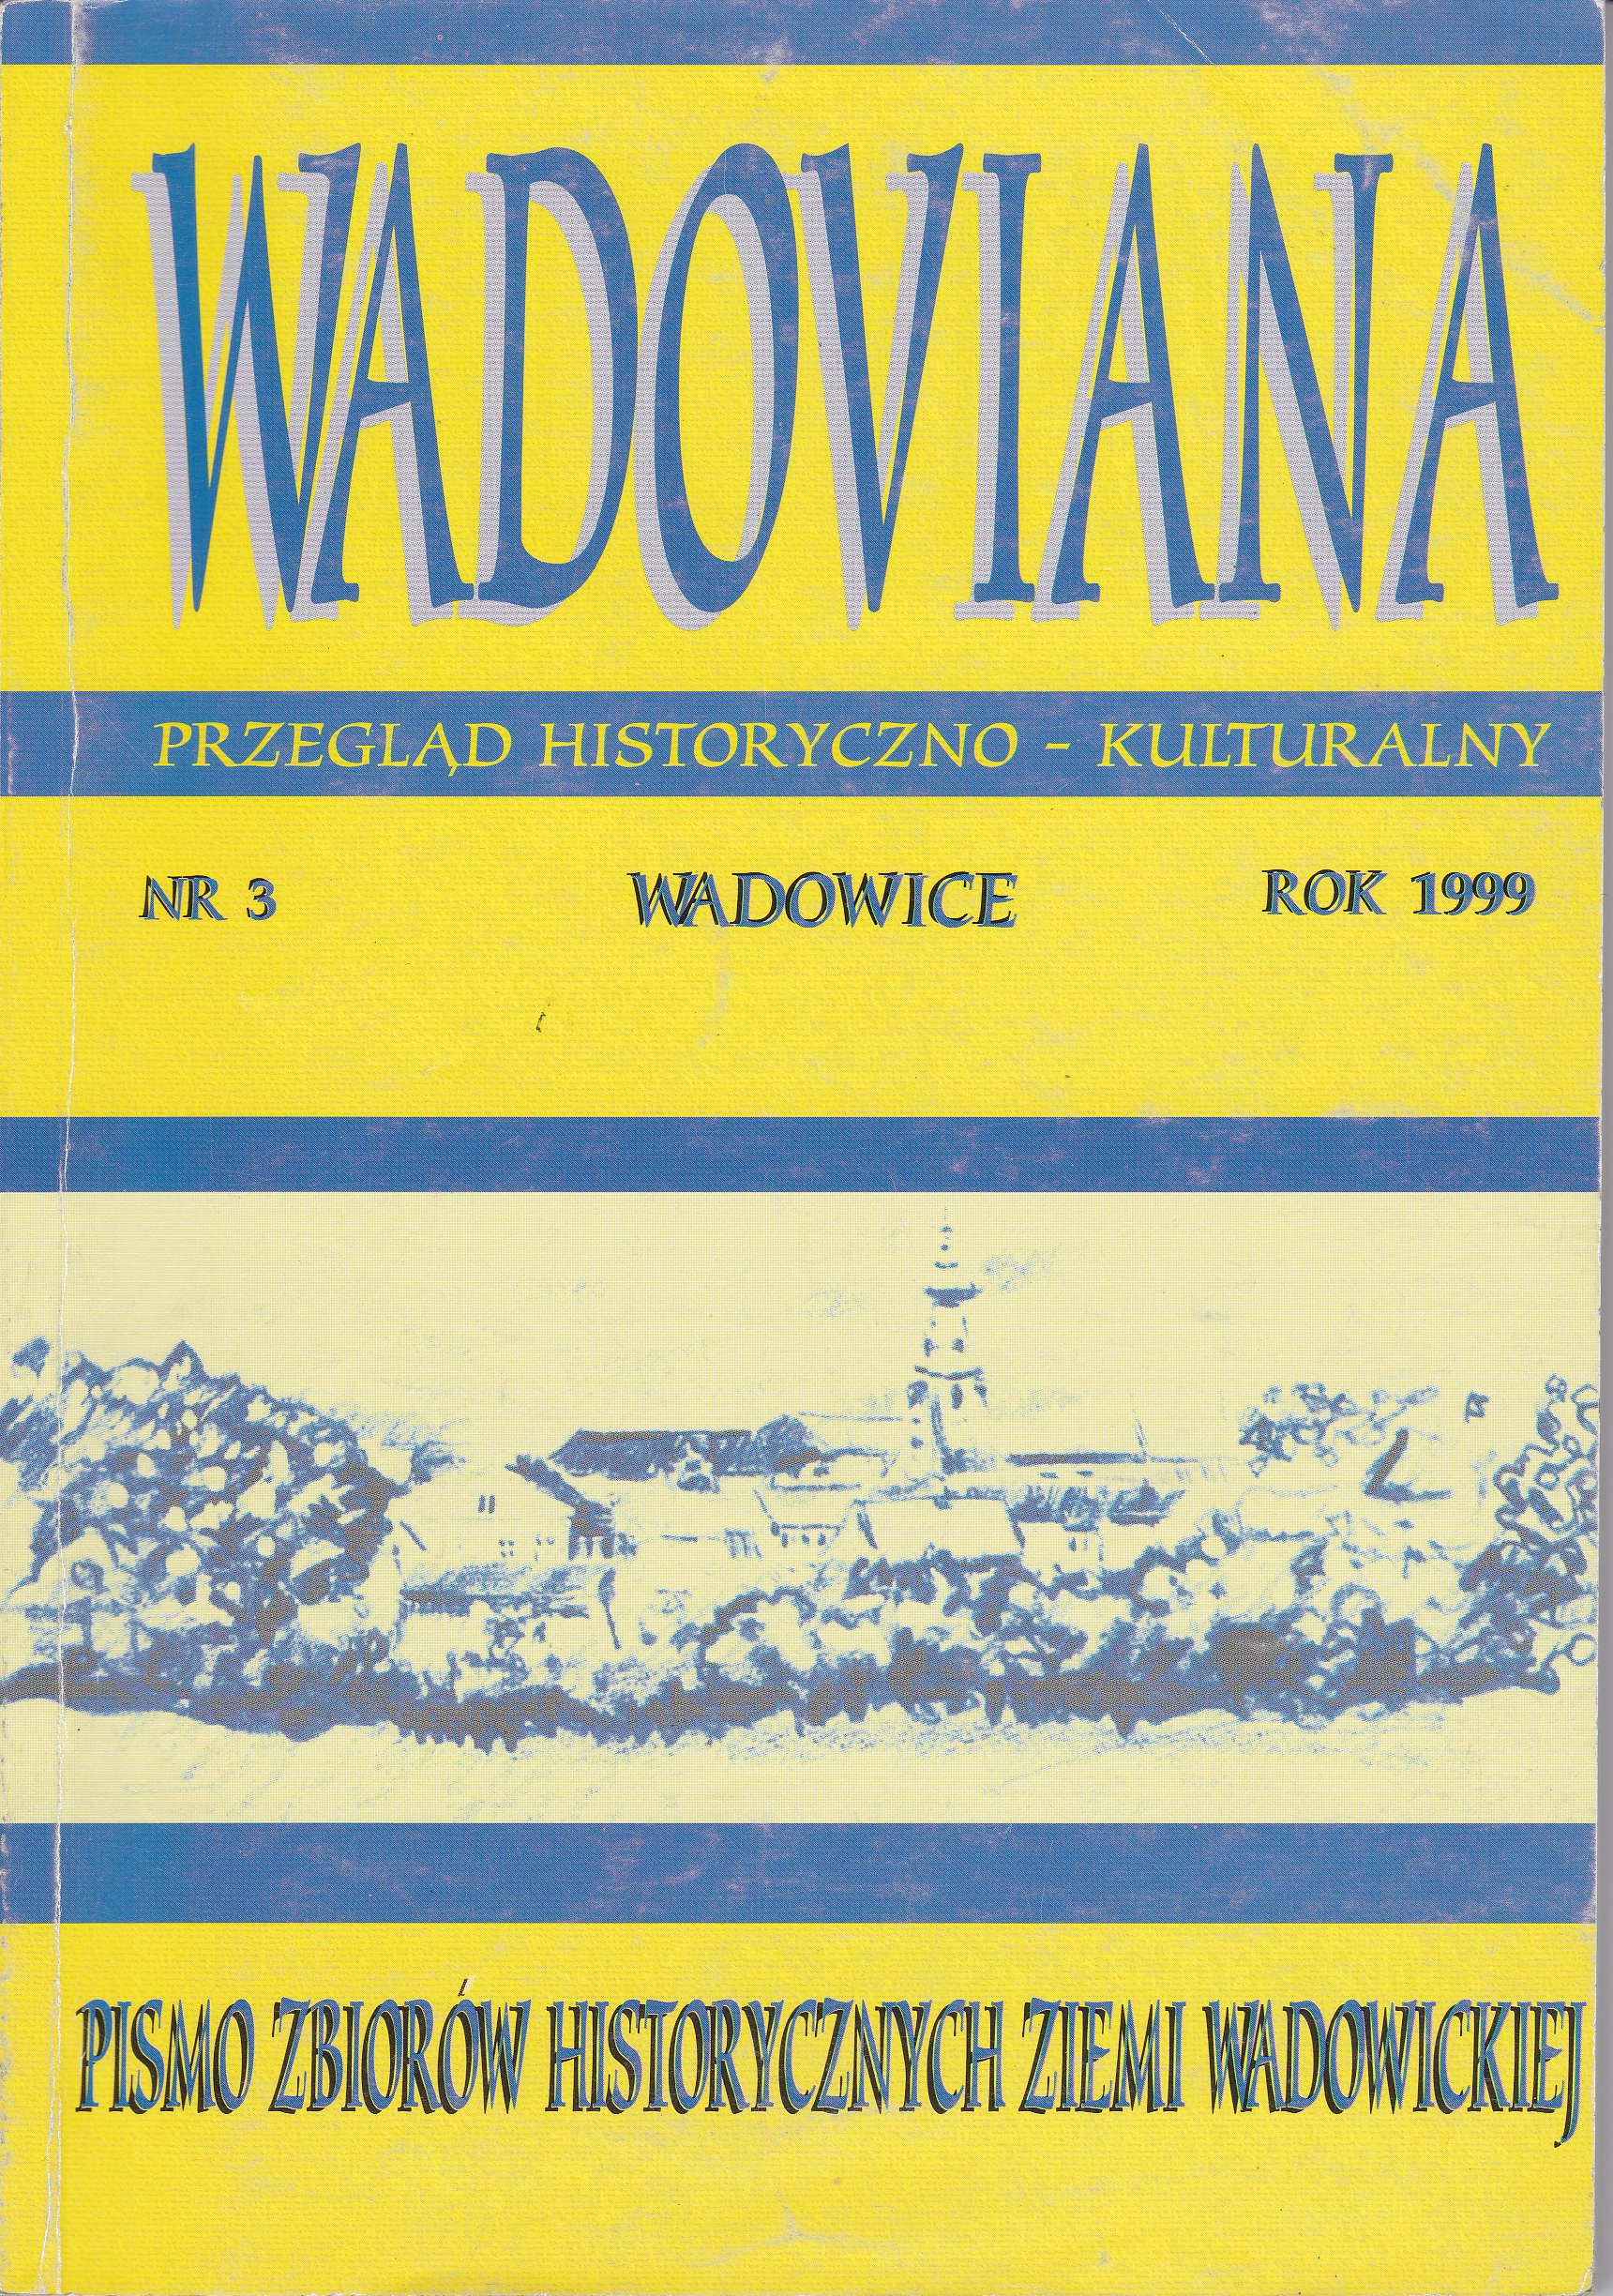 connections between the generals of independent Poland and the Wadowice region Cover Image